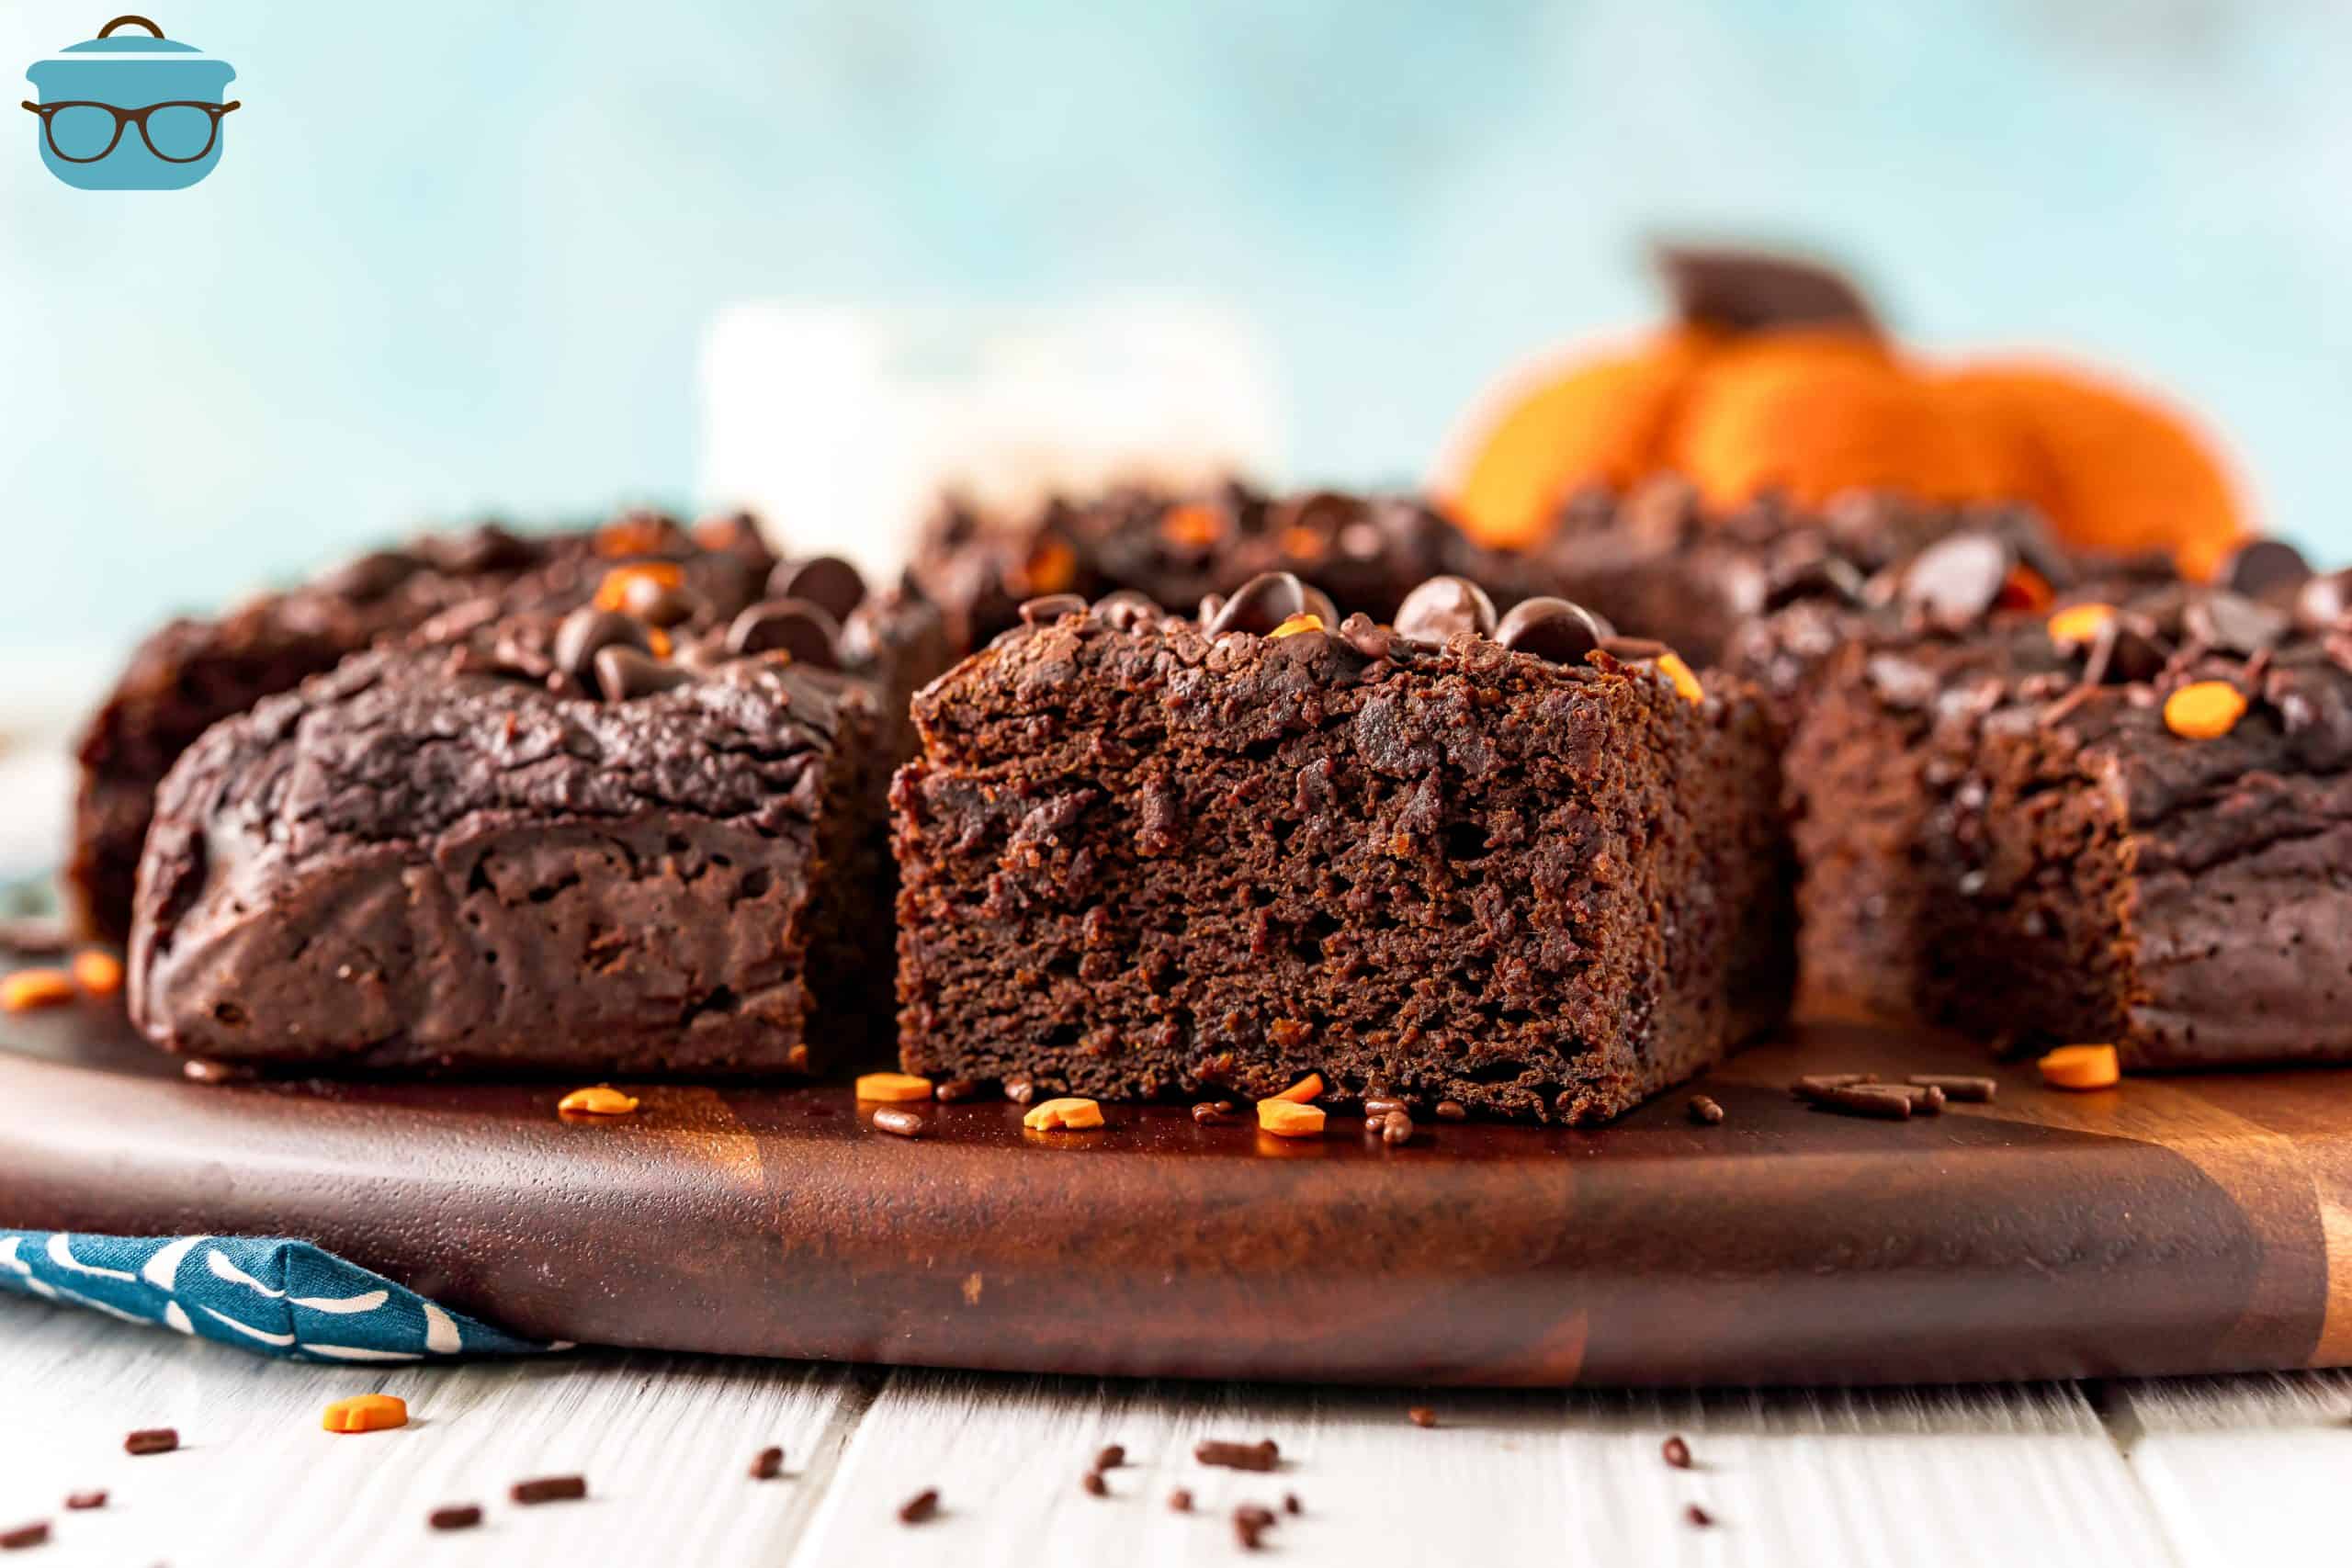 Slices of chocolate pumpkin snack cake shown on a wooden plate with a small pumpkin in the background.